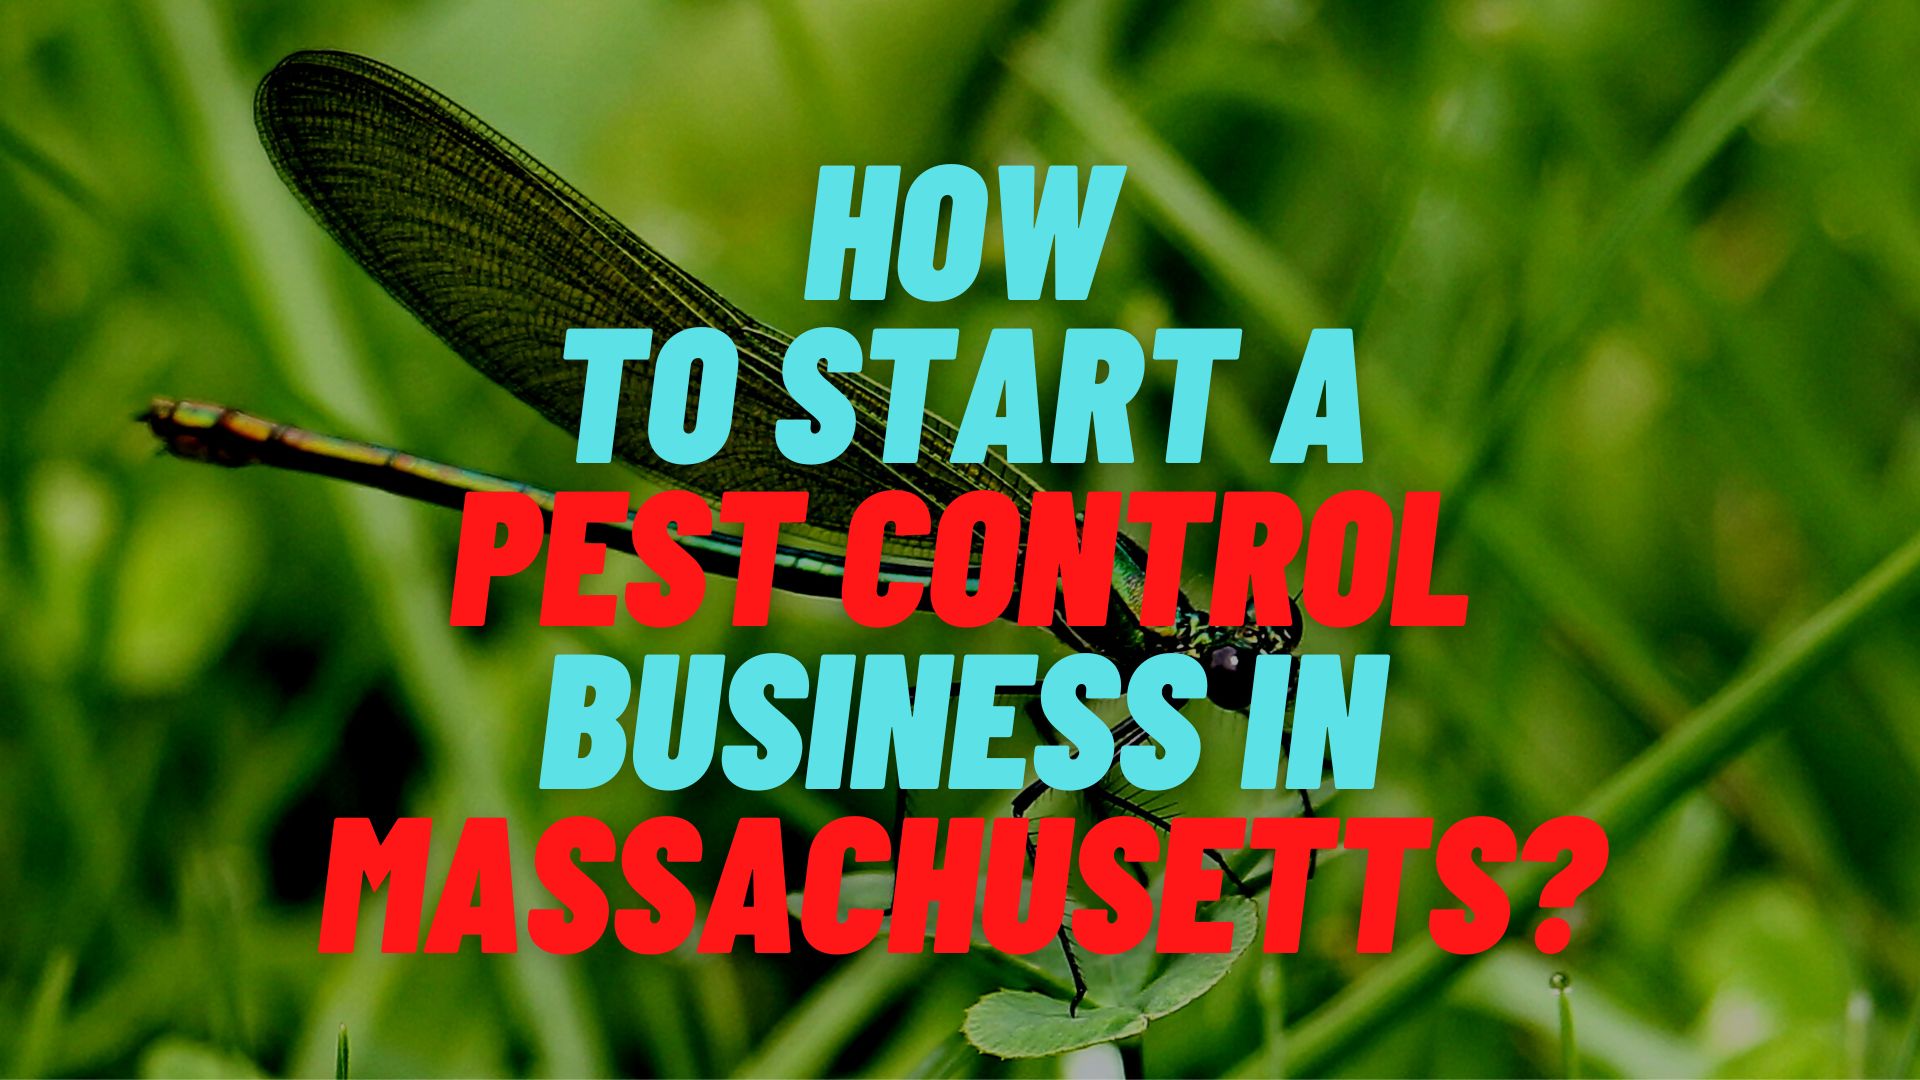 How to start a pest control business in Massachusetts?